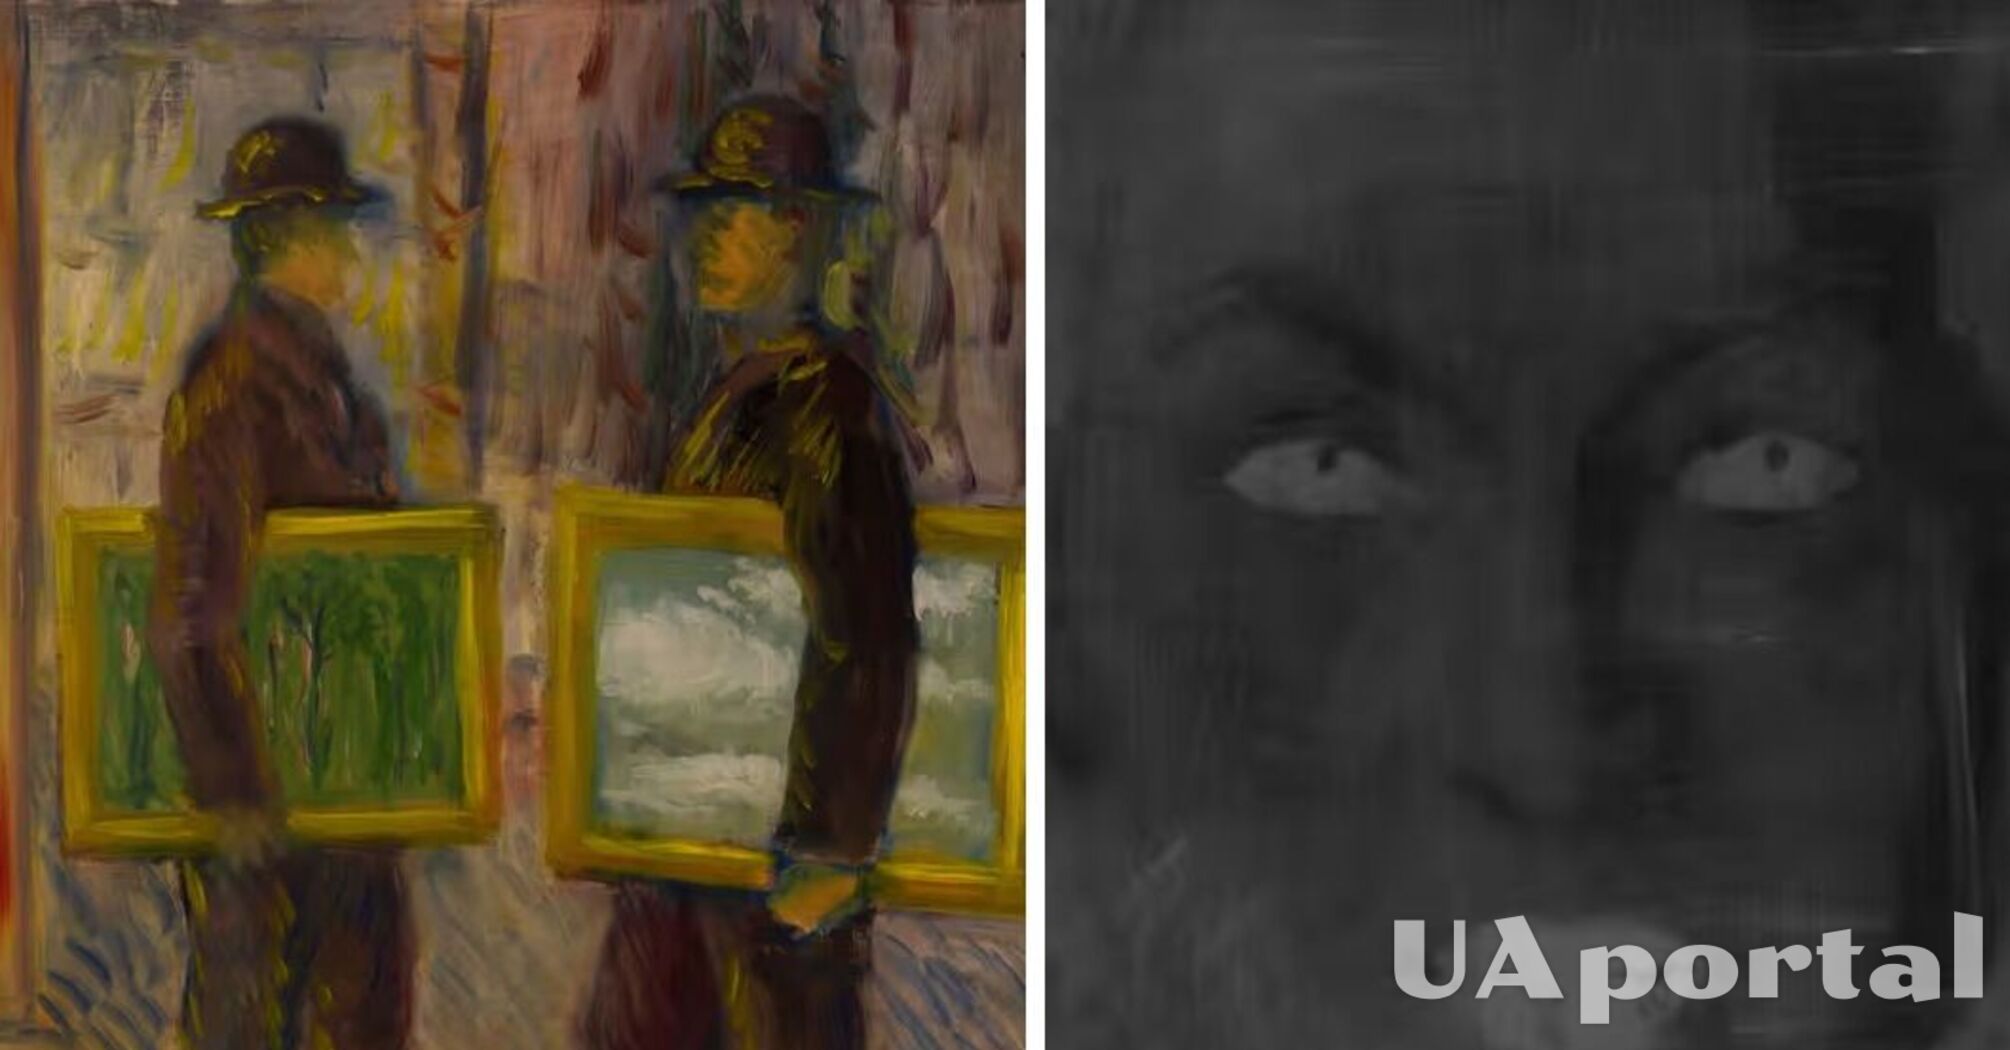 Hidden image found in a painting by a famous Belgian artist (photo)